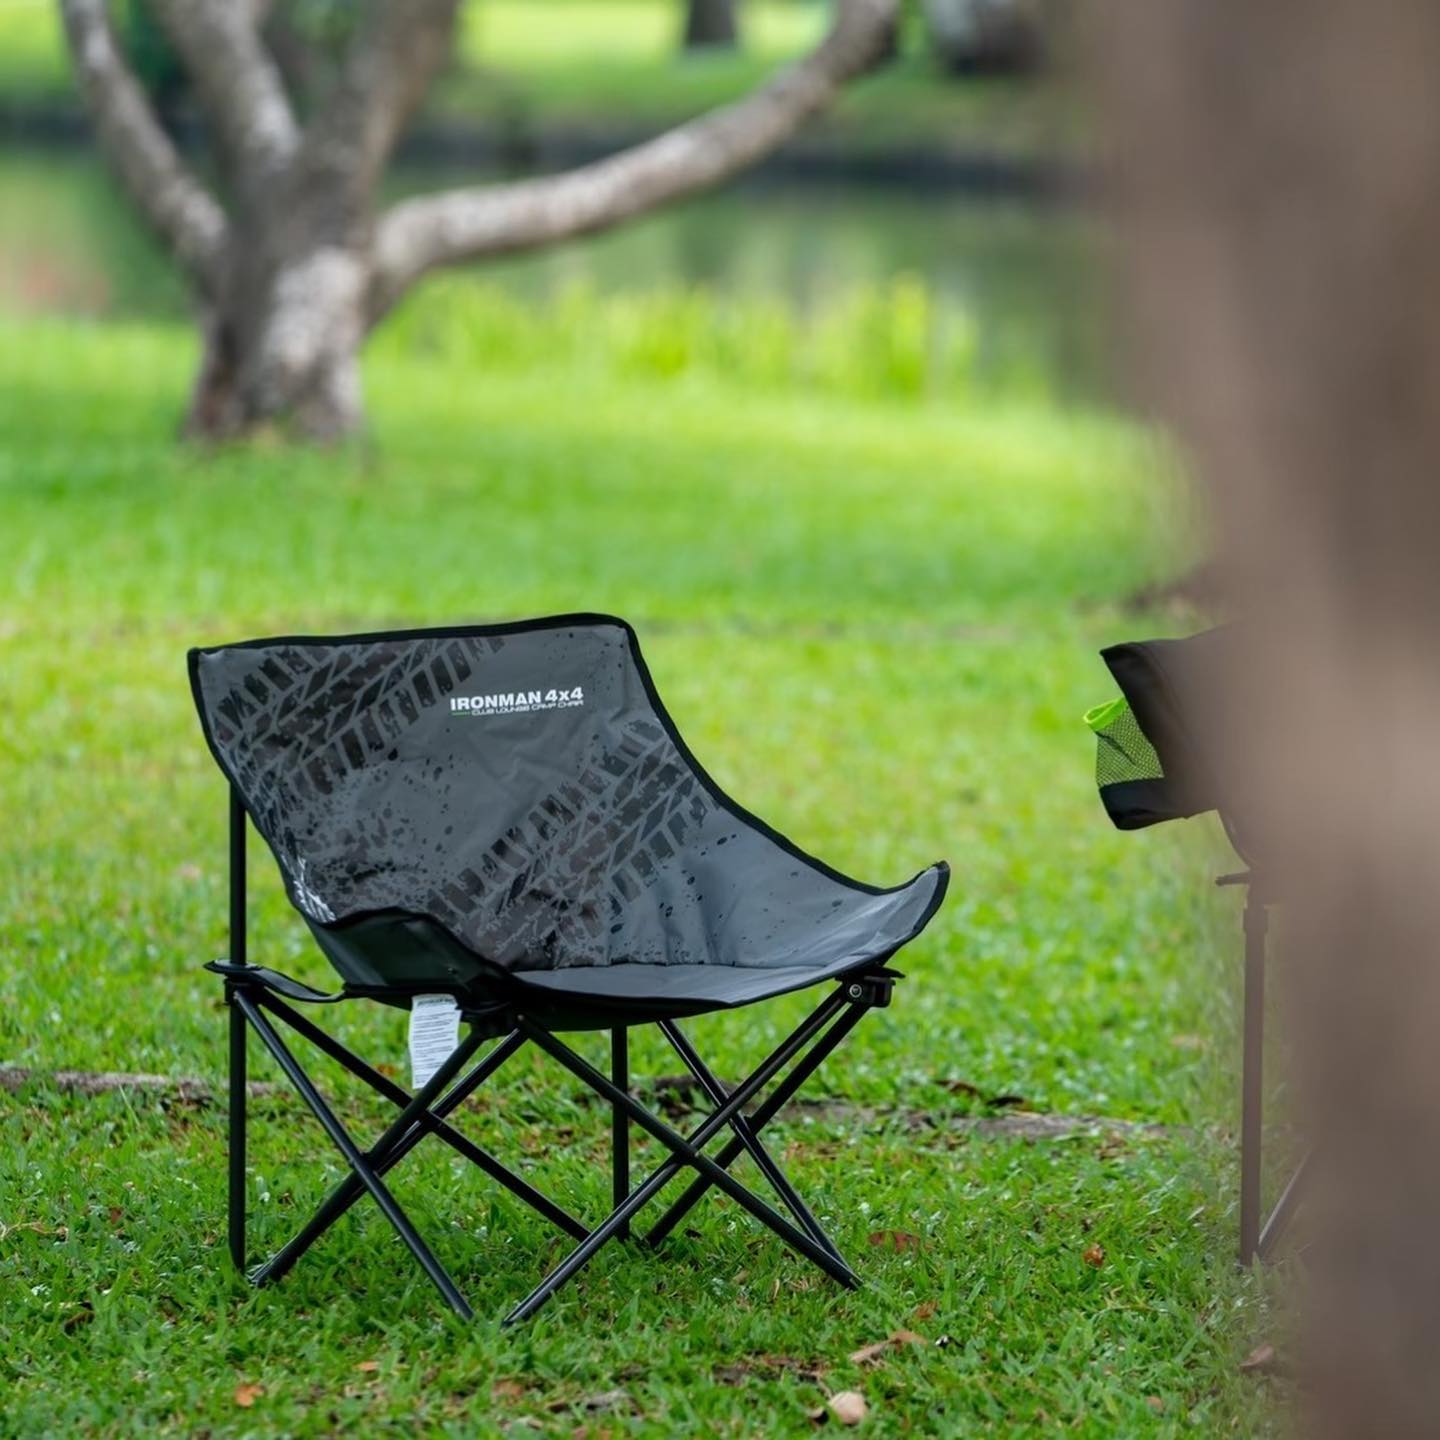 MID SIZE LOW BACK CAMP CHAIR